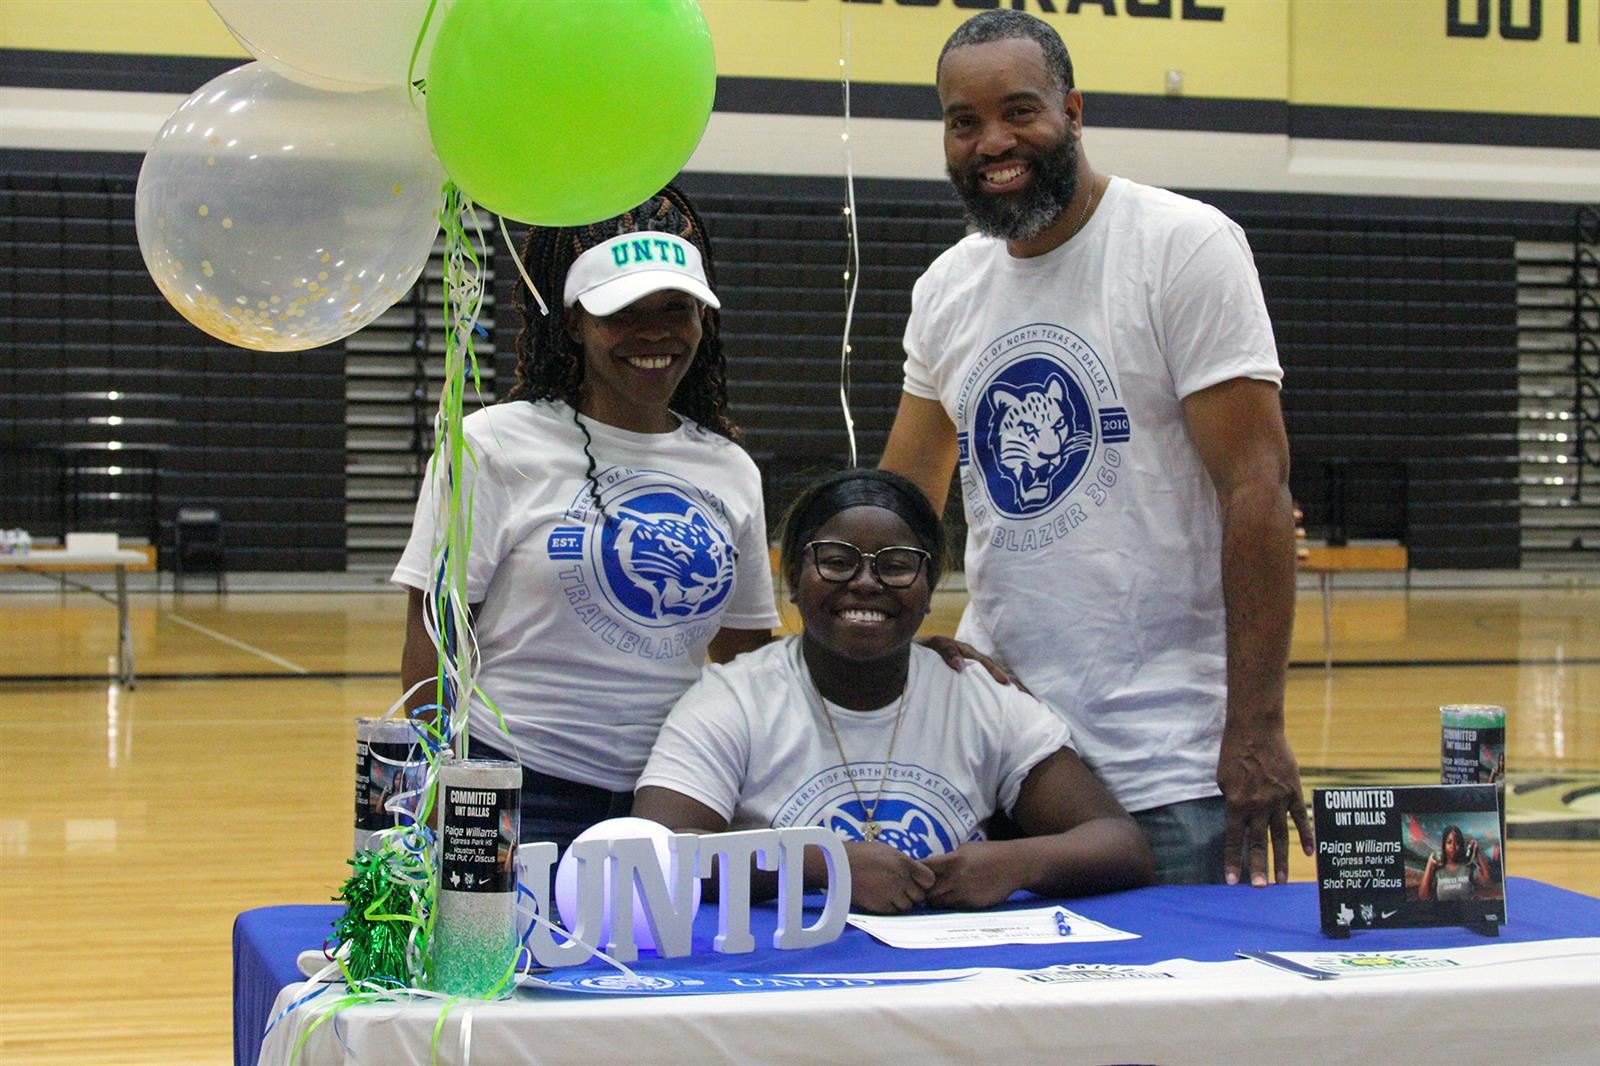 Cypress Park High School senior Paige Williams, seated, signed a letter of intent to the University of North Texas at Dallas.